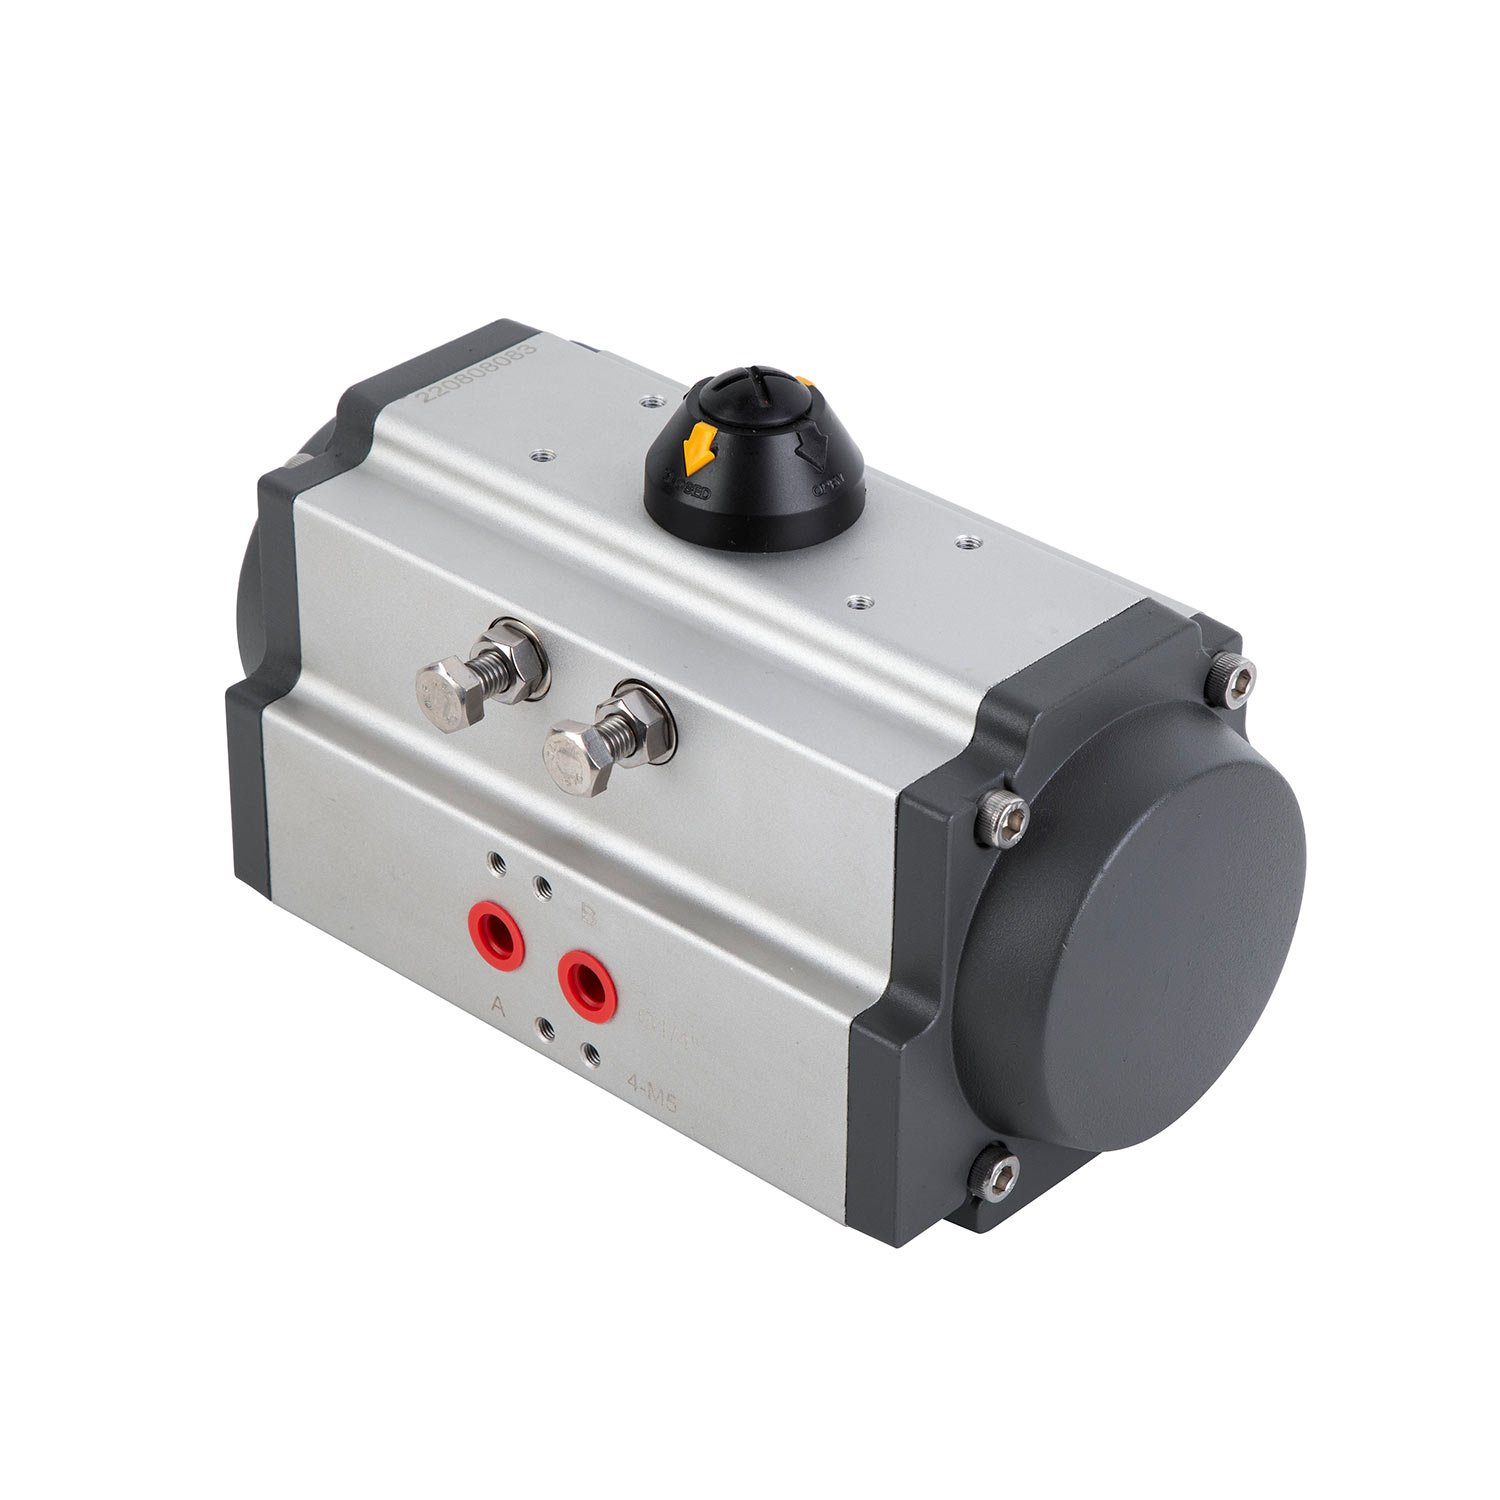 Rack And Pinion Rotary Actuator Powering Efficiency And Precision In Industrial Automation (2)jtp